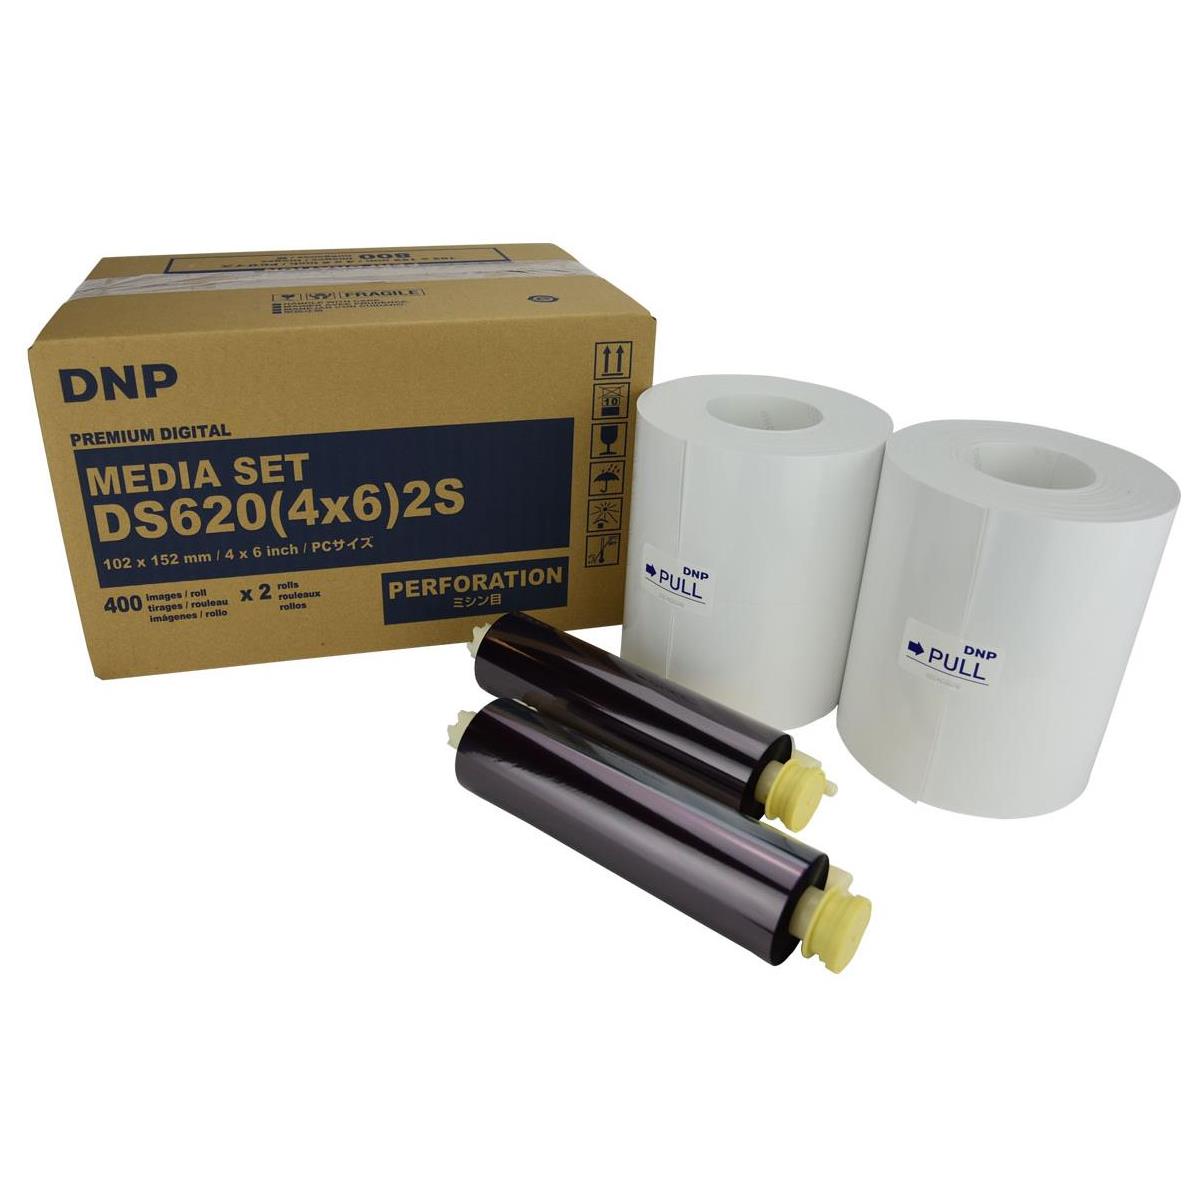 Photos - Ink Ribbon DNP DS620A Printer Media, Center Perf, 4x6" Roll, 2-Pack (Total 800 P 